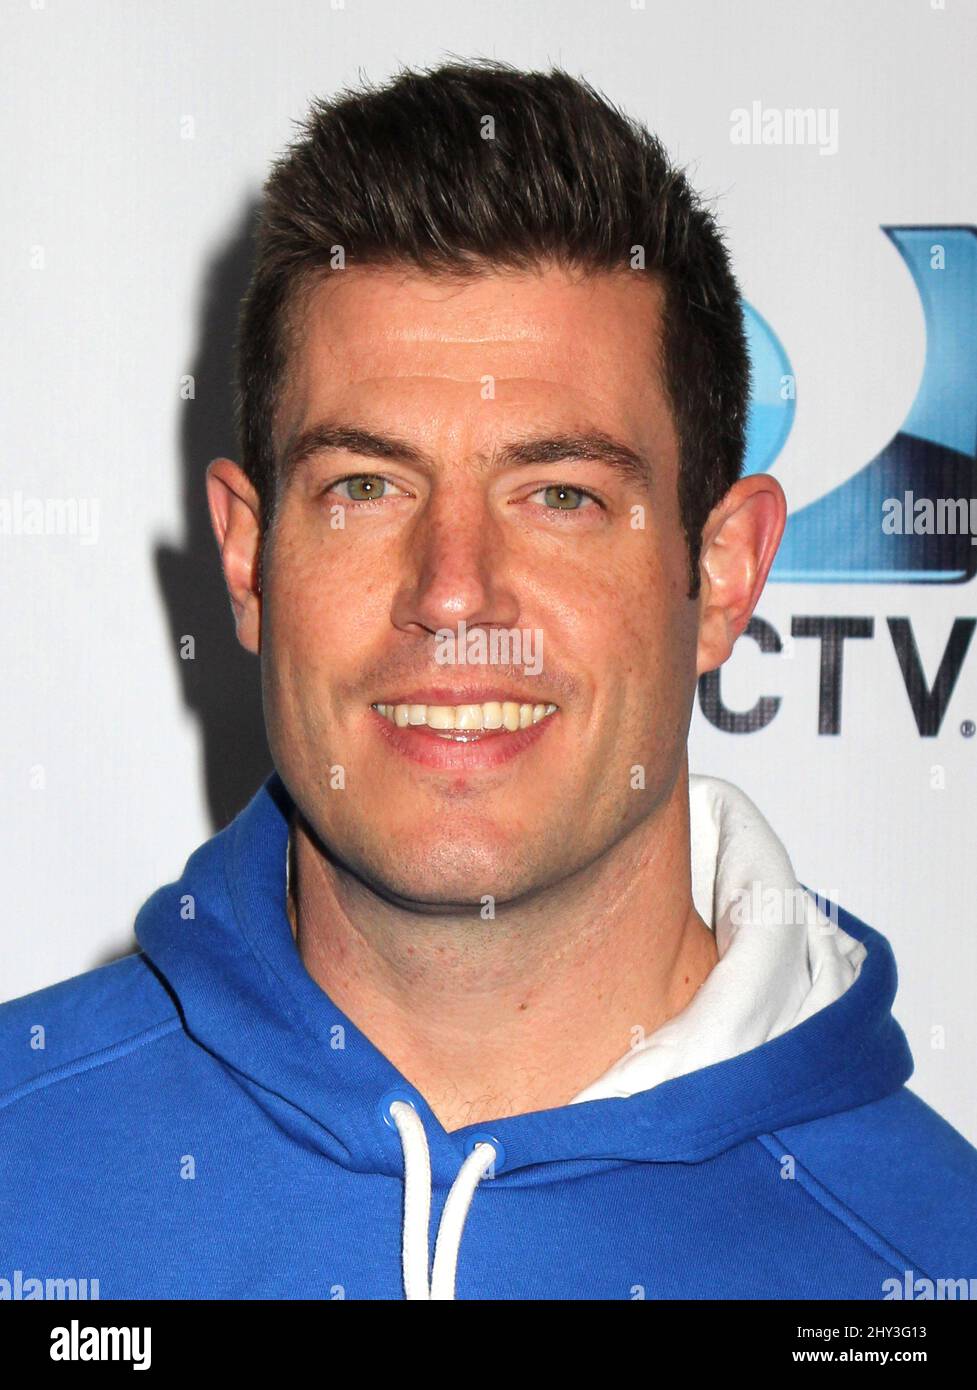 Jesse Palmer attending DIRECTV's 8th Annual Celebrity Beach Bowl held at DTV SuperFan Stadium in New York, USA. Stock Photo